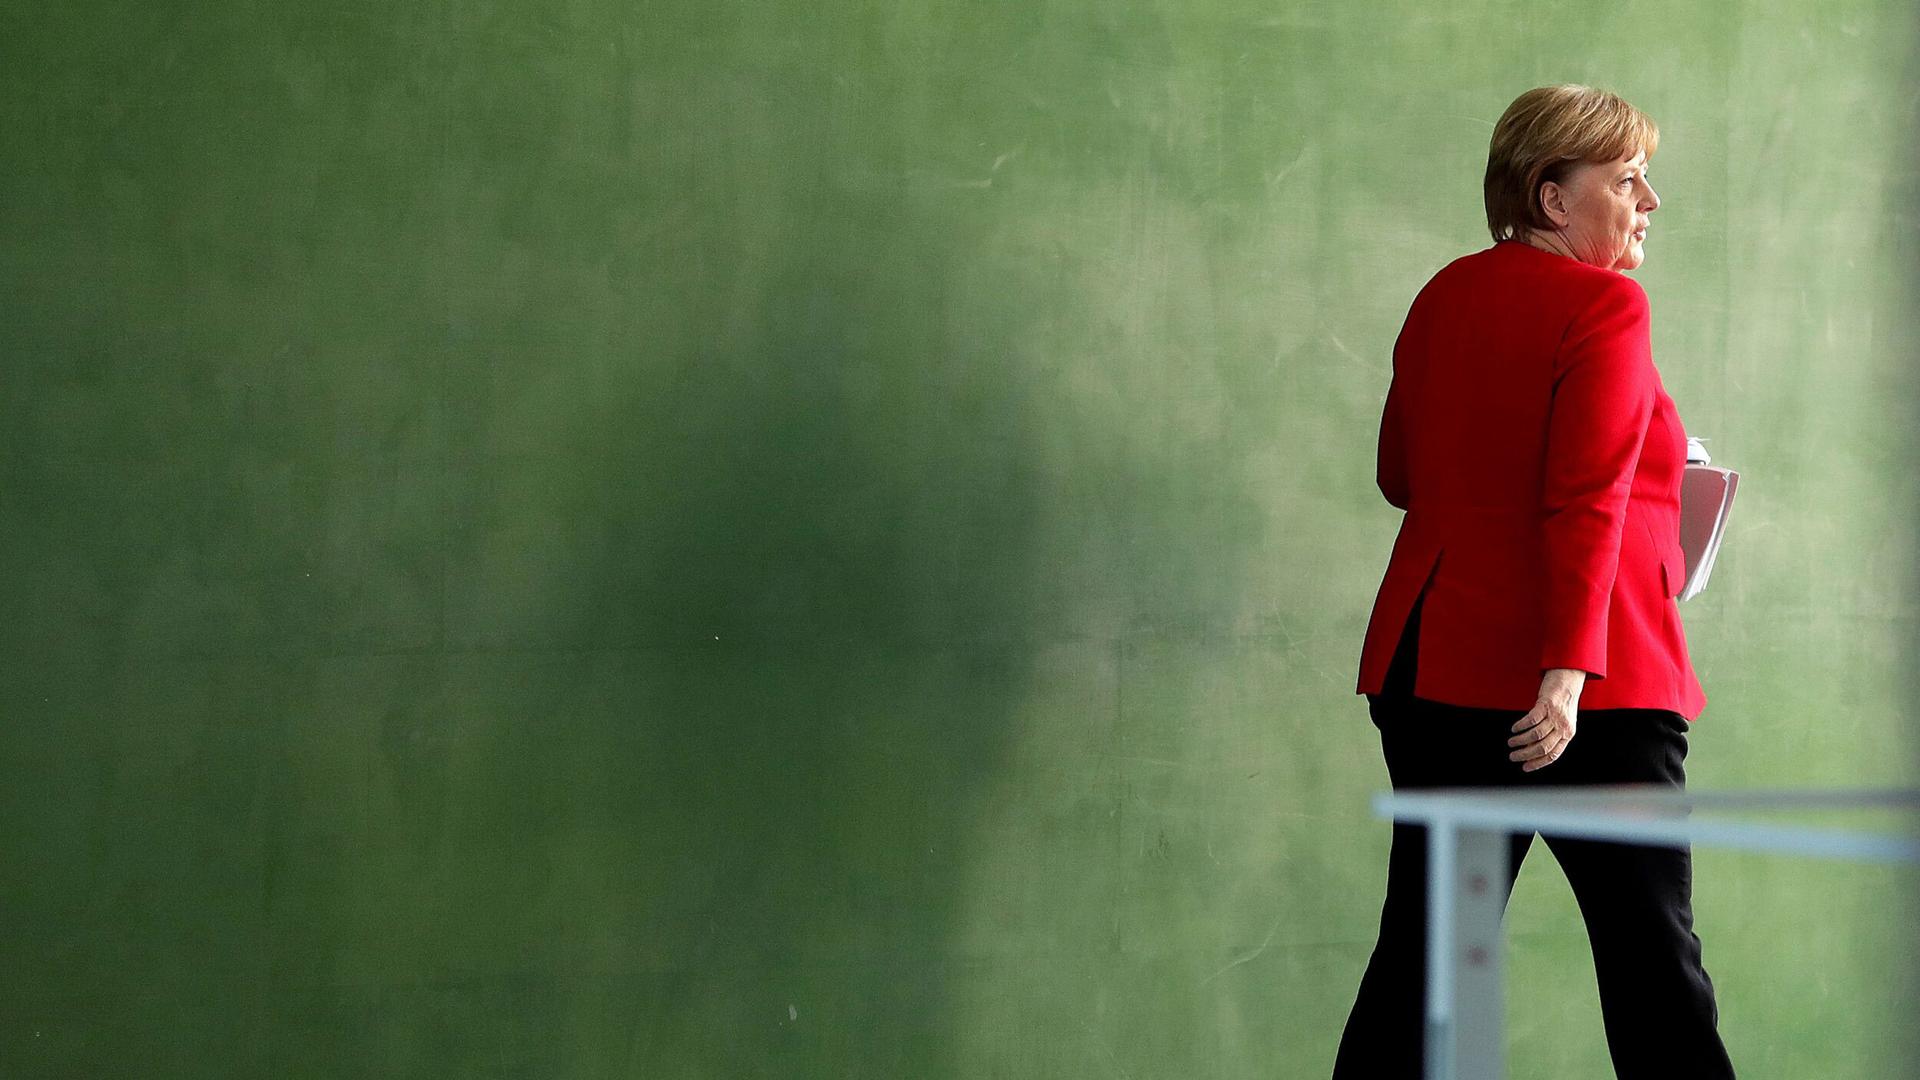 German Chancellor Angela Merkel is shown walking next to a green wall and wearing a red suit jacket.